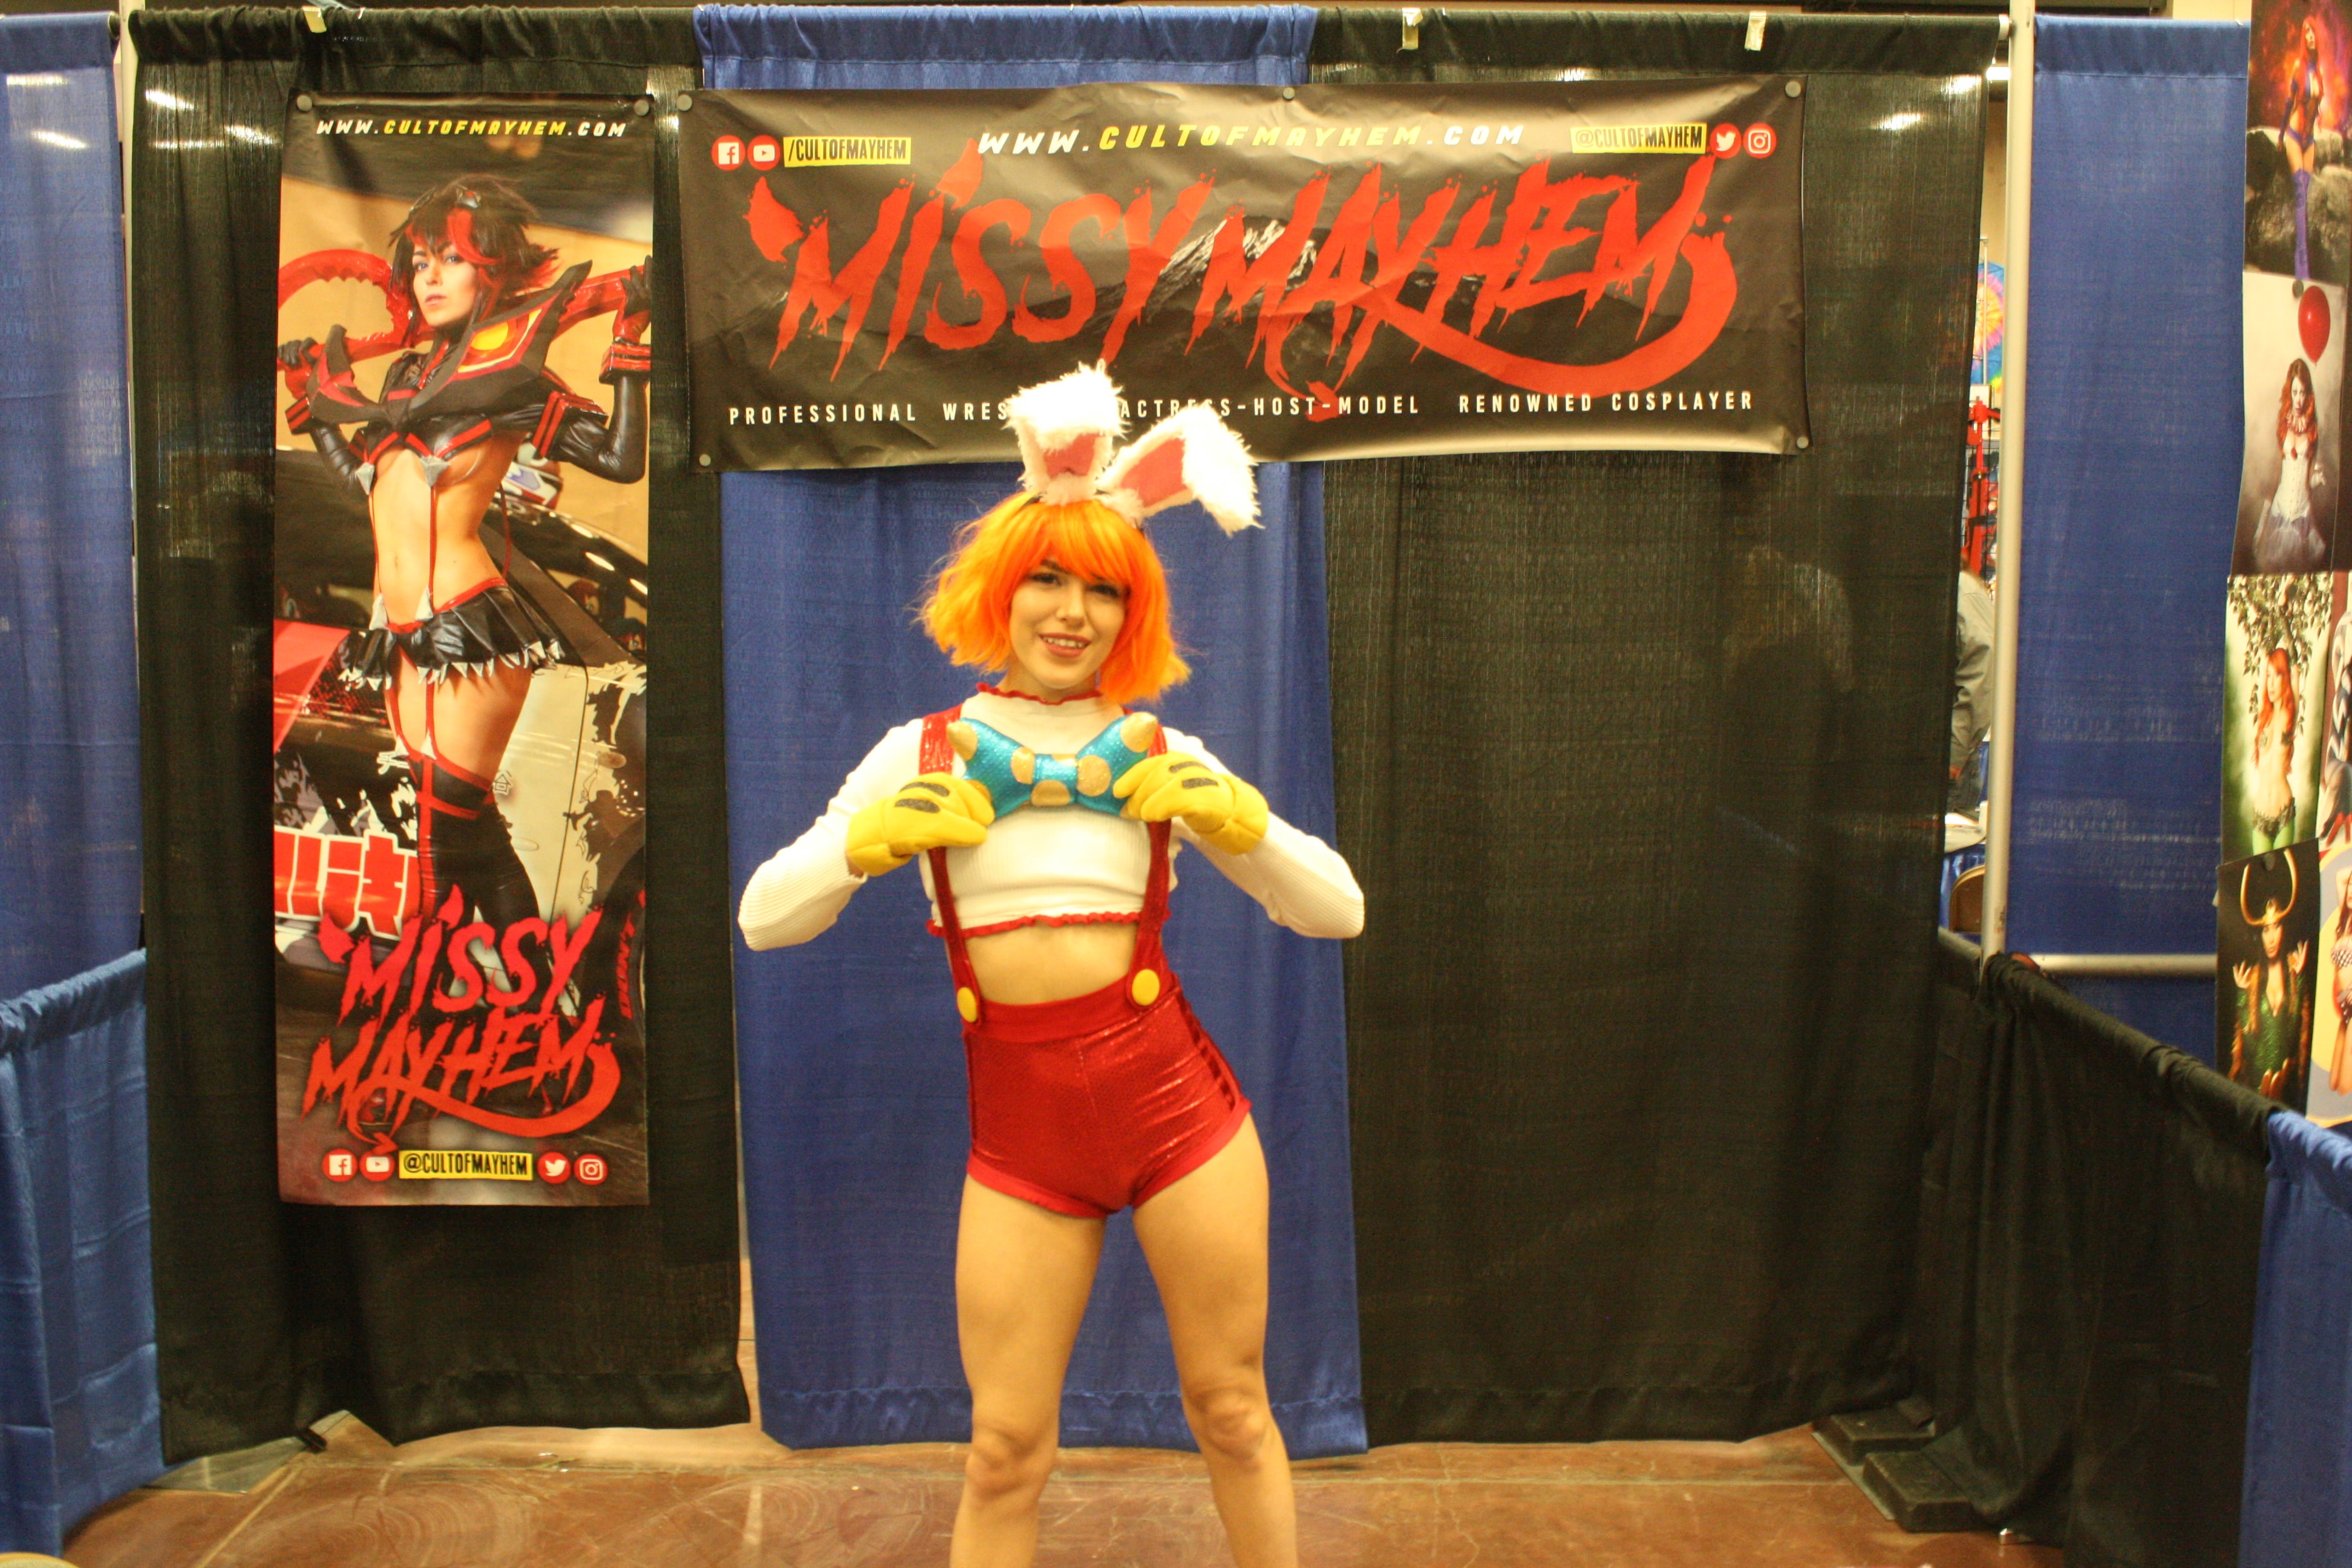 Not your typical cosplayer: An interview with Missy Mayhem